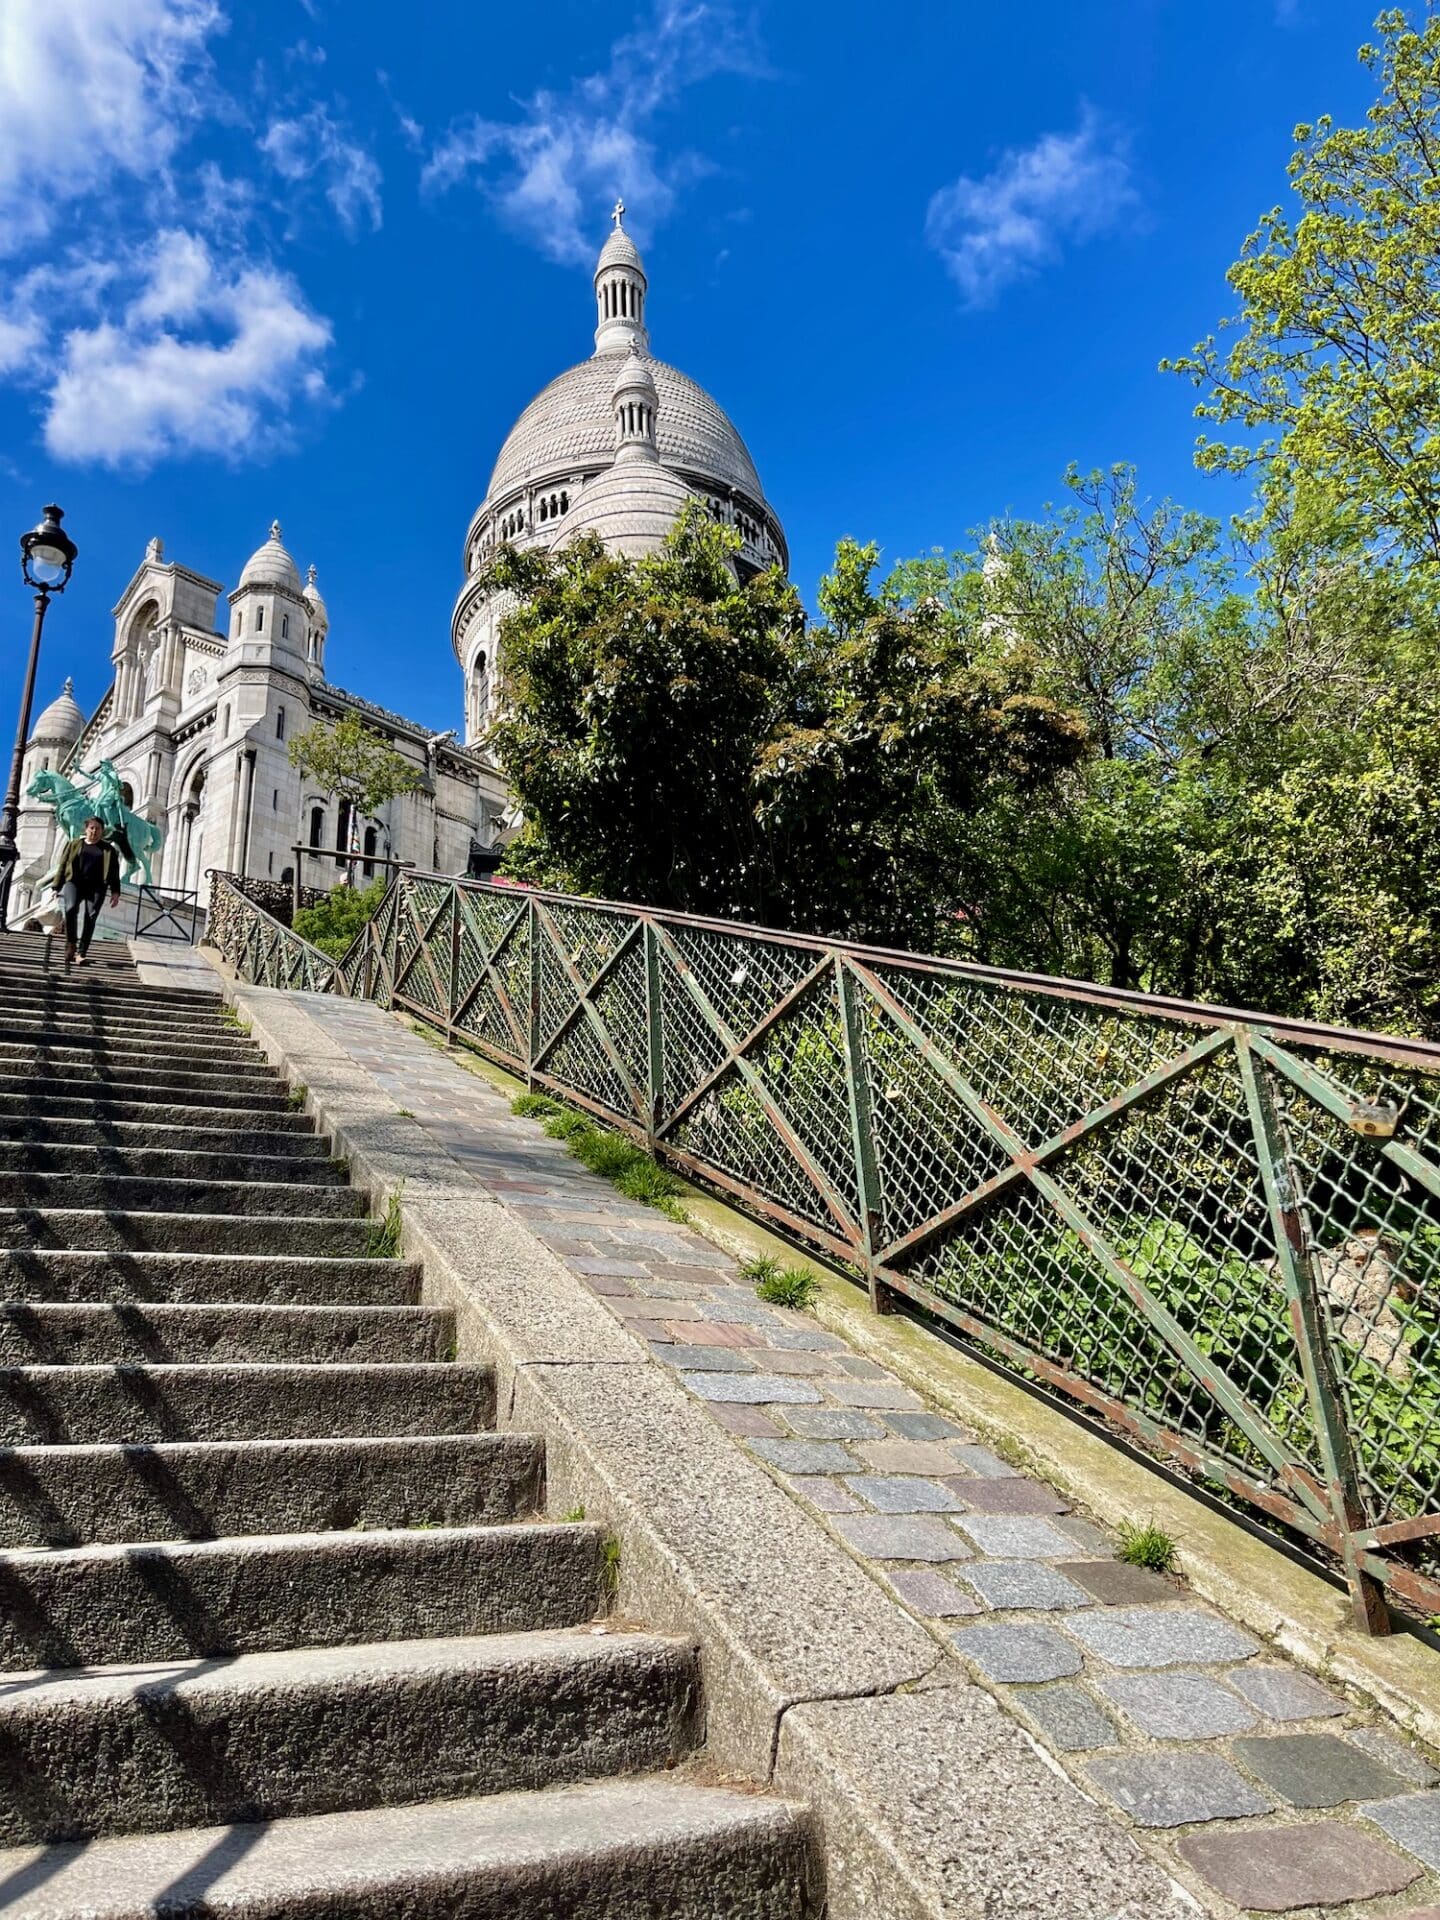 Side view of white-domed Basilica of the Sacré-Coeur.